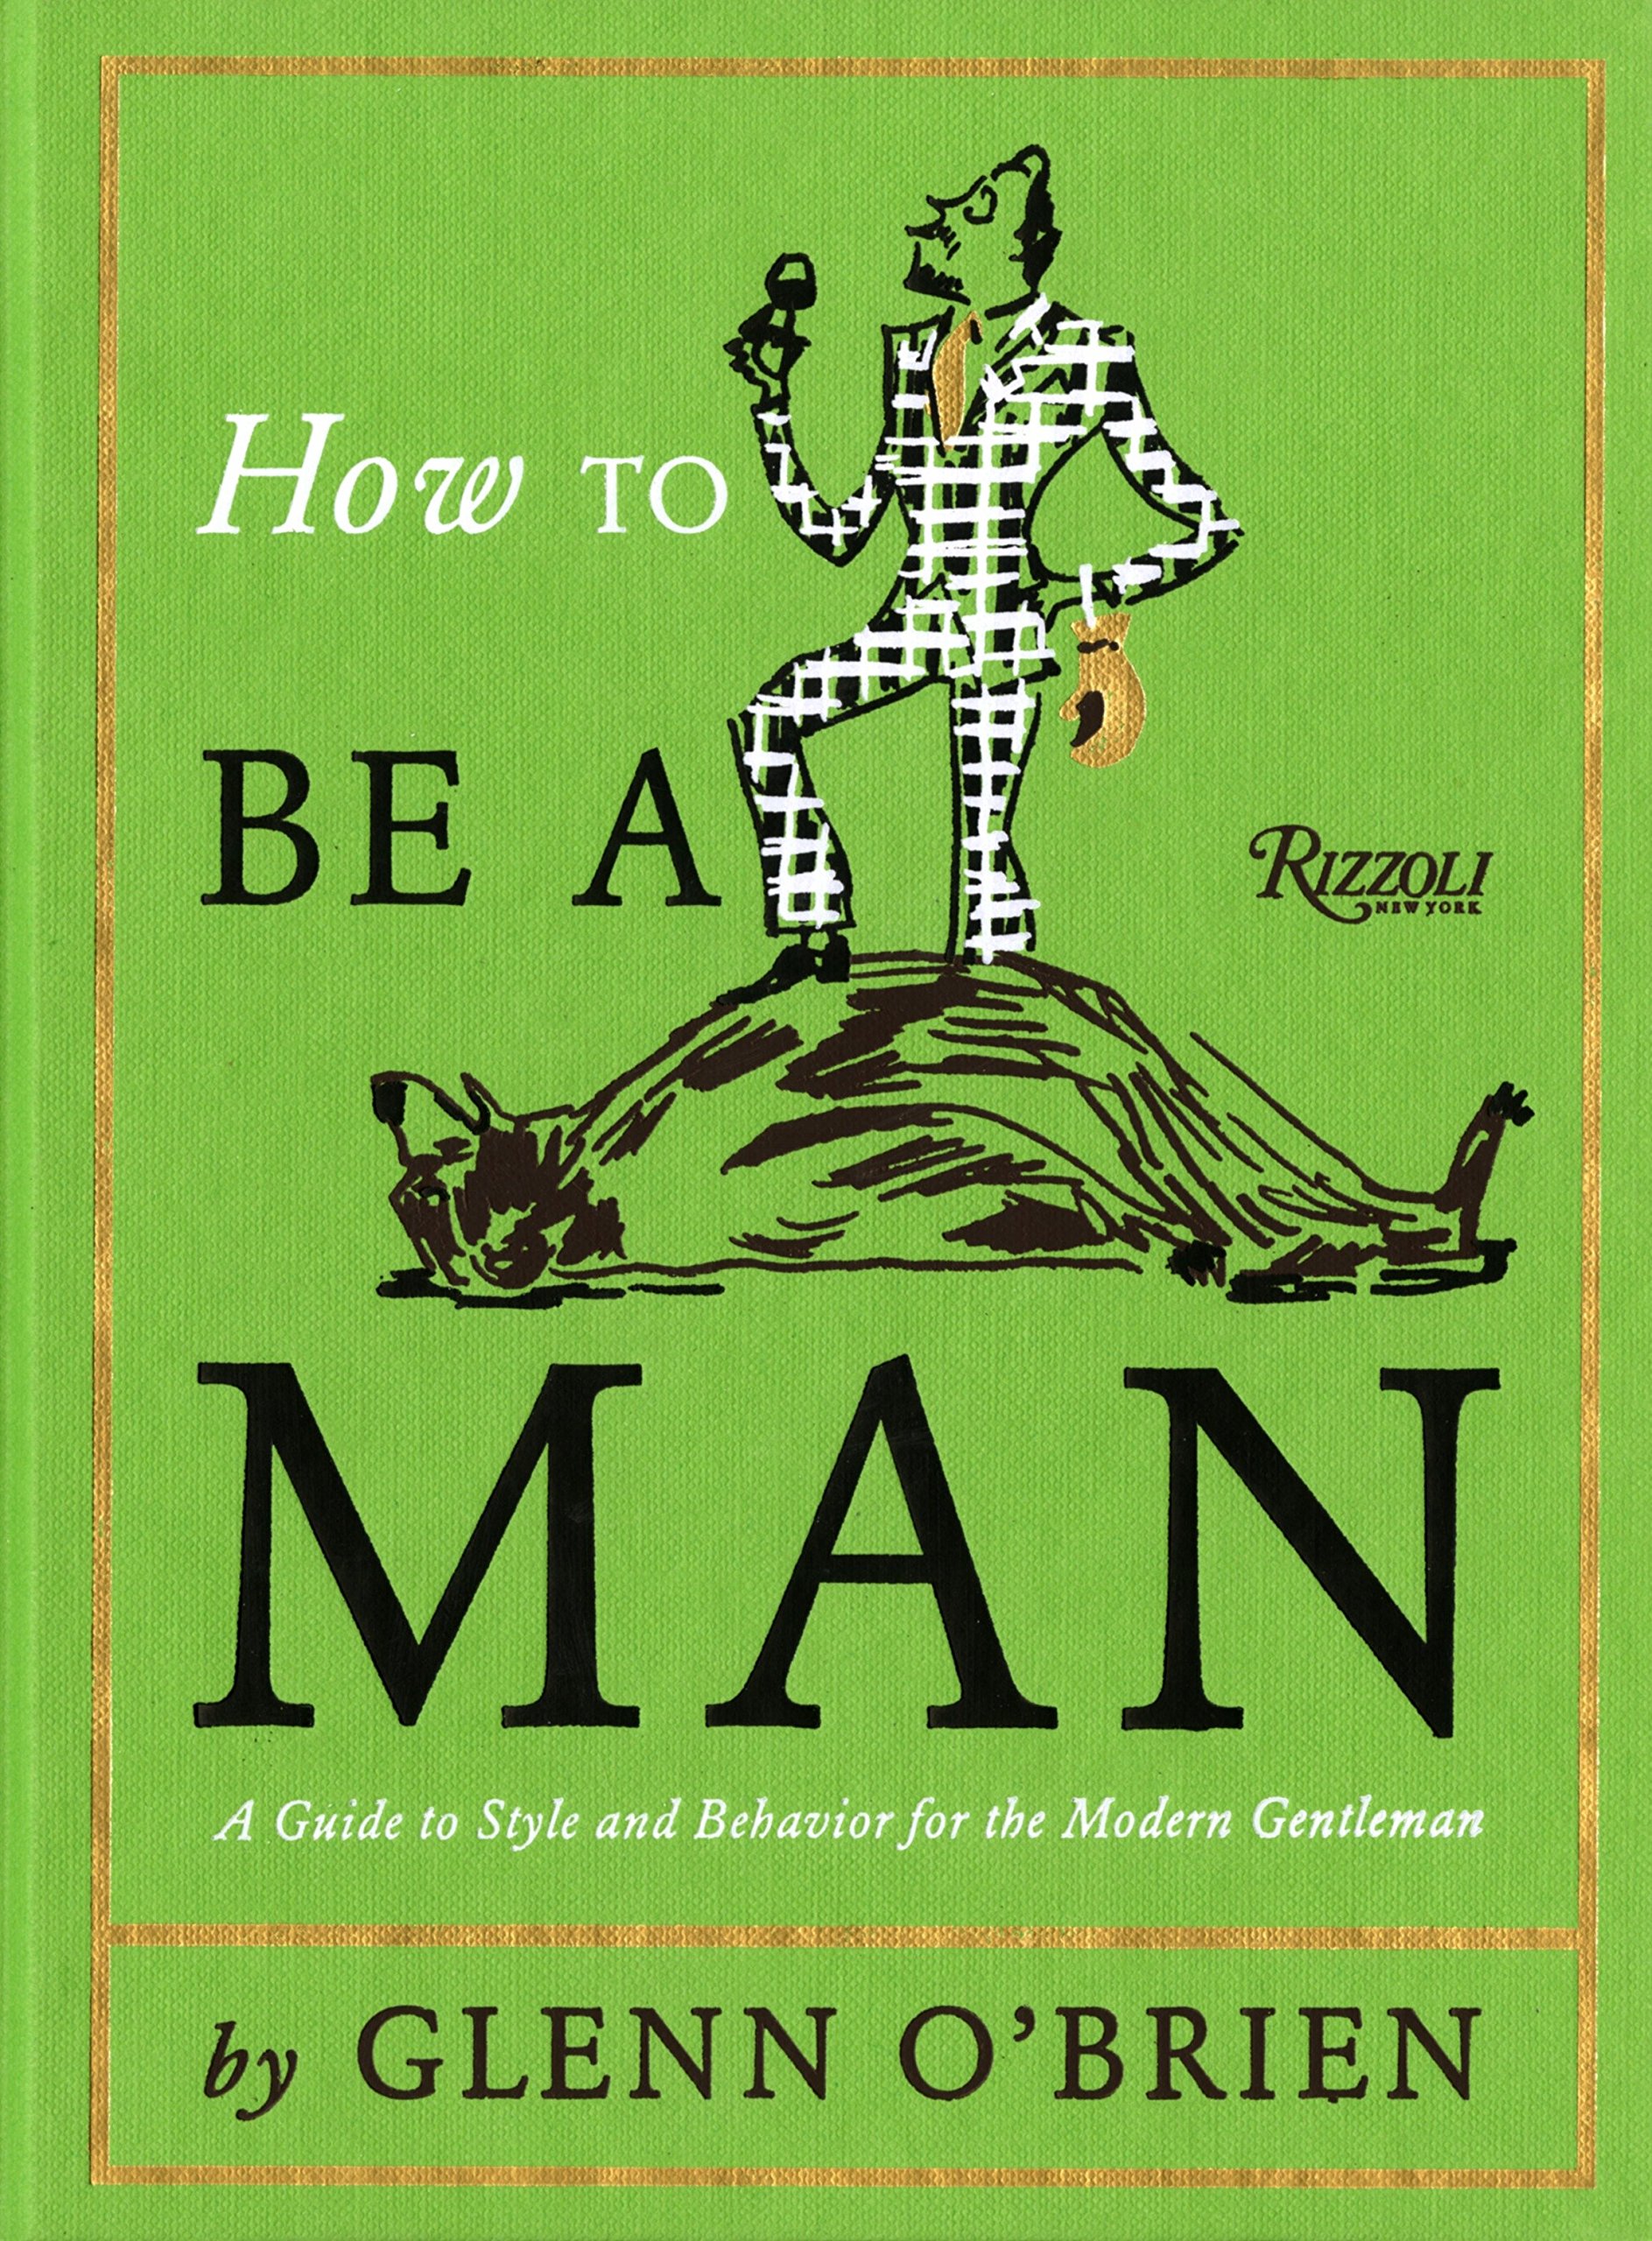 Glenn O'Brien（2011）『How To Be a Man A Guide To Style and Behavior For The Modern Gentleman』Rizzoli